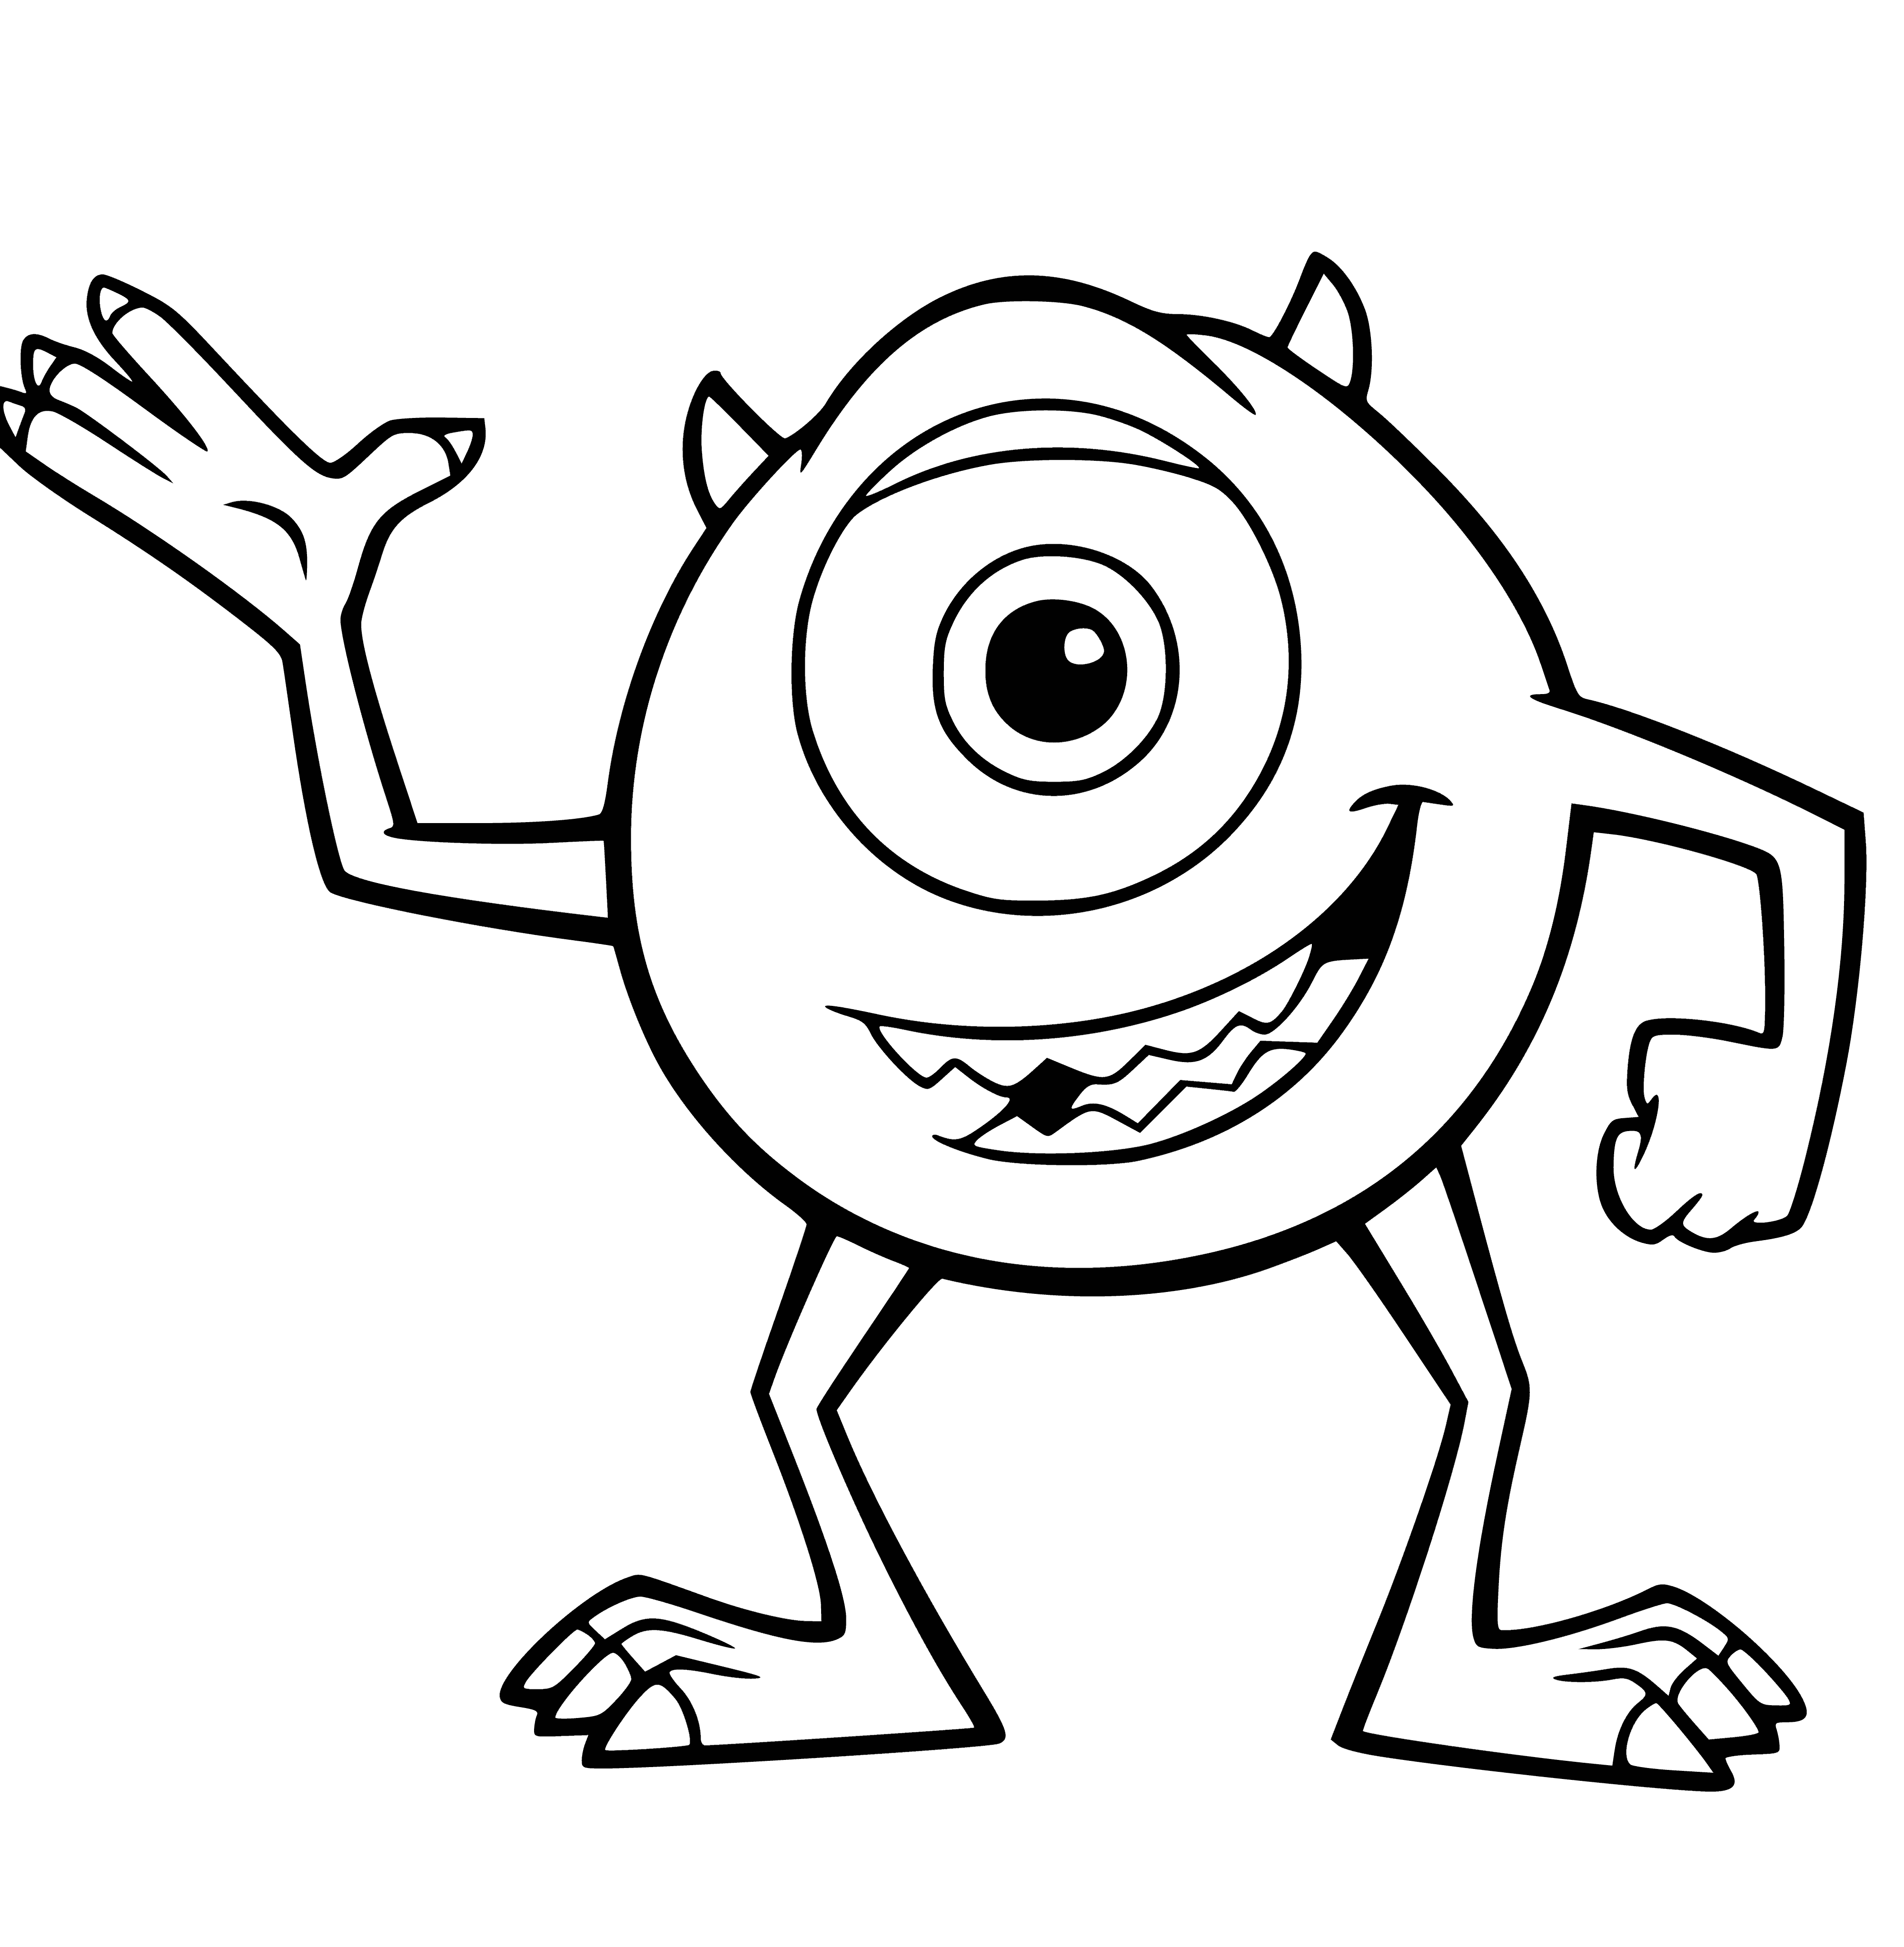 coloring page: A three-eyed, four-armed blue & white monster in a purple shirt w/ green stripes has a mouth full of sharp teeth.